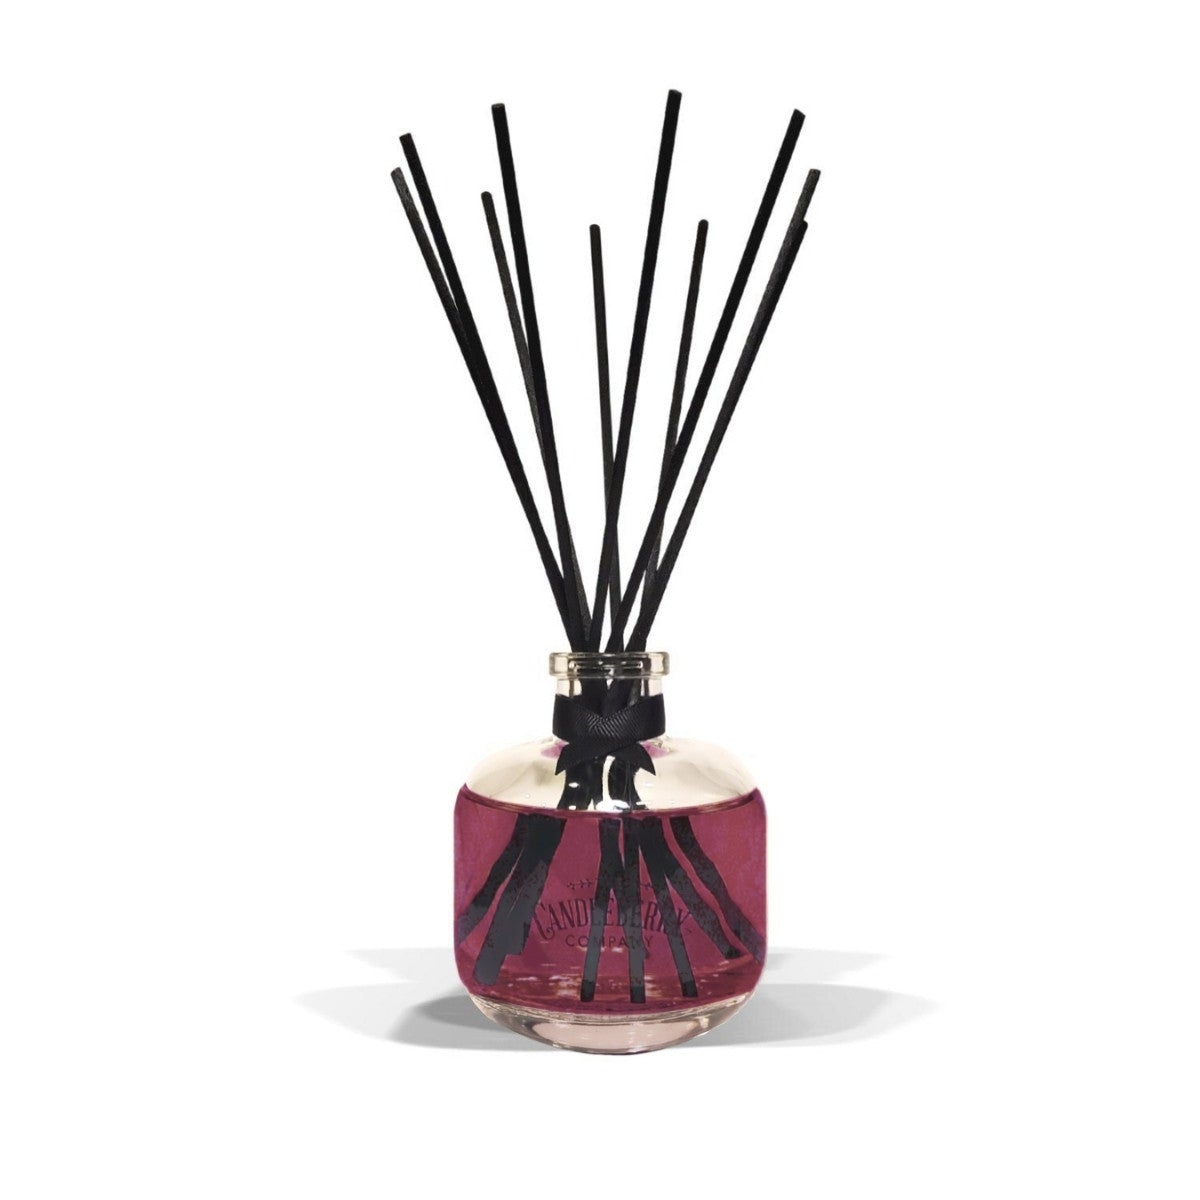 Pumpkin Praline Waffles™ 6.25 oz Fragranced Reed Diffuser - The Candleberry® Candle Company - 6.25 oz Fragranced Reed Diffuser - The Candleberry® Candle Company